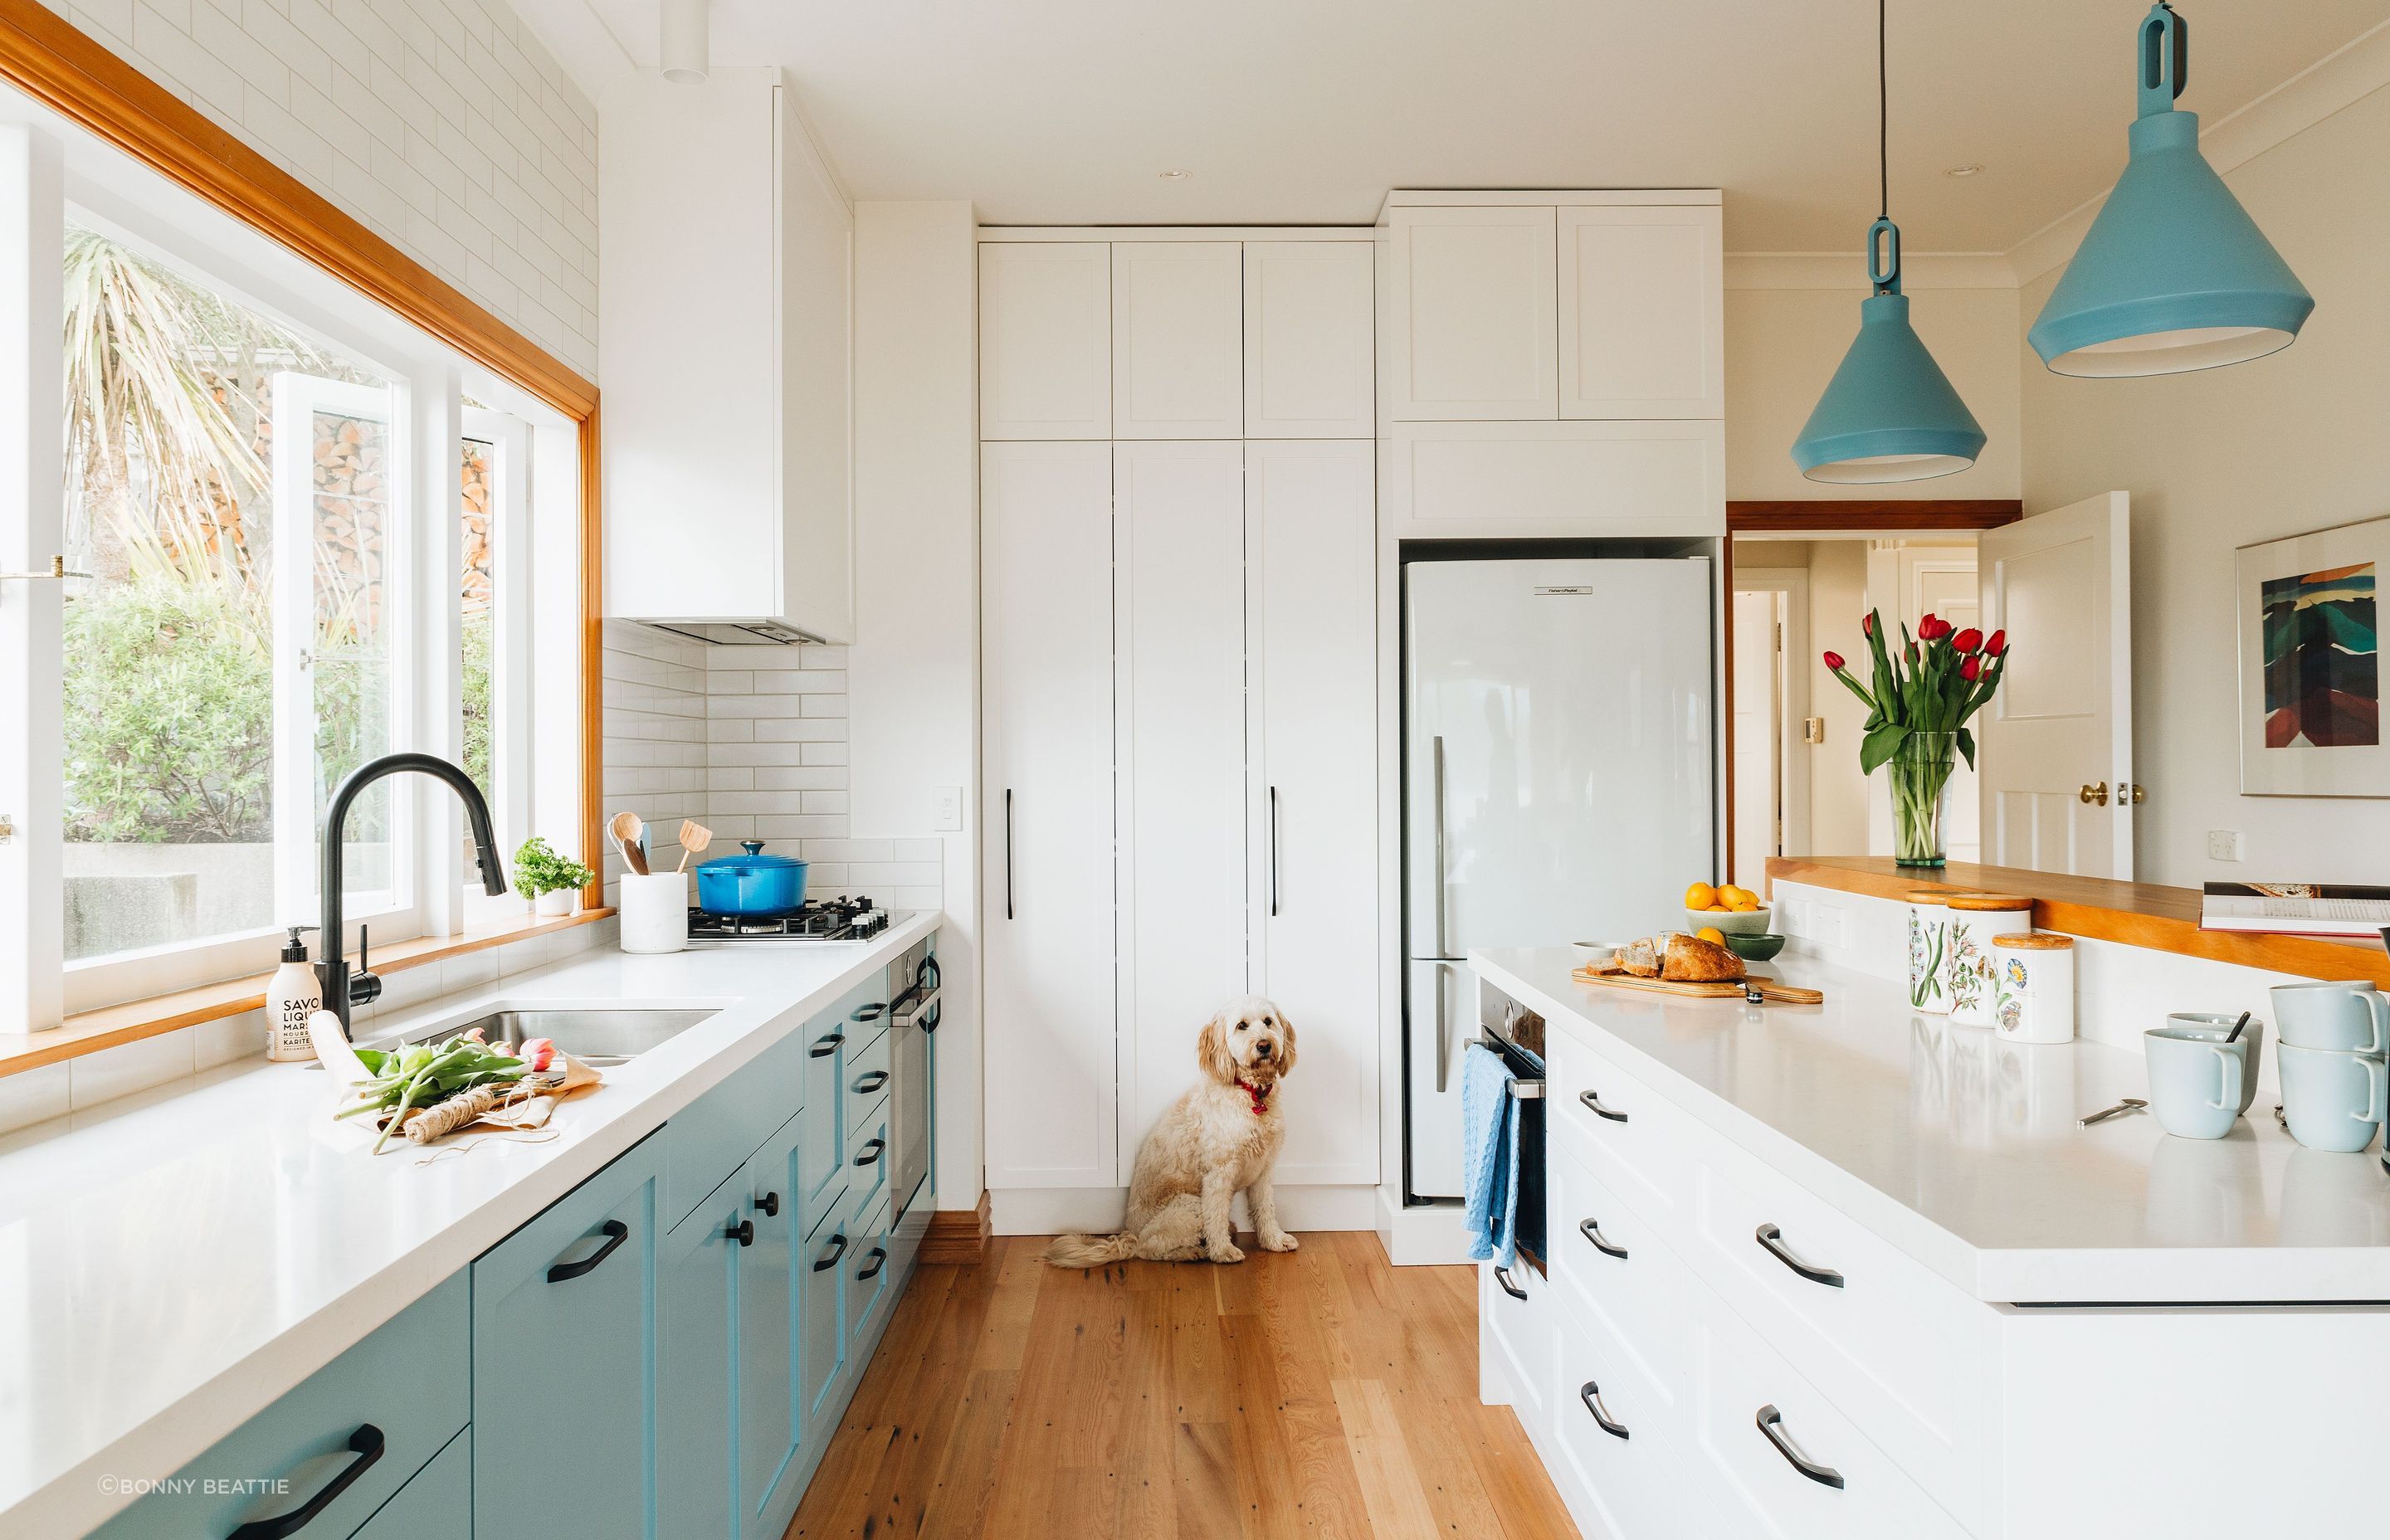 Seatoun Heights Kitchen -  the cabinet's blue was drawn from a number of our client's favourite artworks so we all felt really confident to use it to add presence and personality to the kitchen.